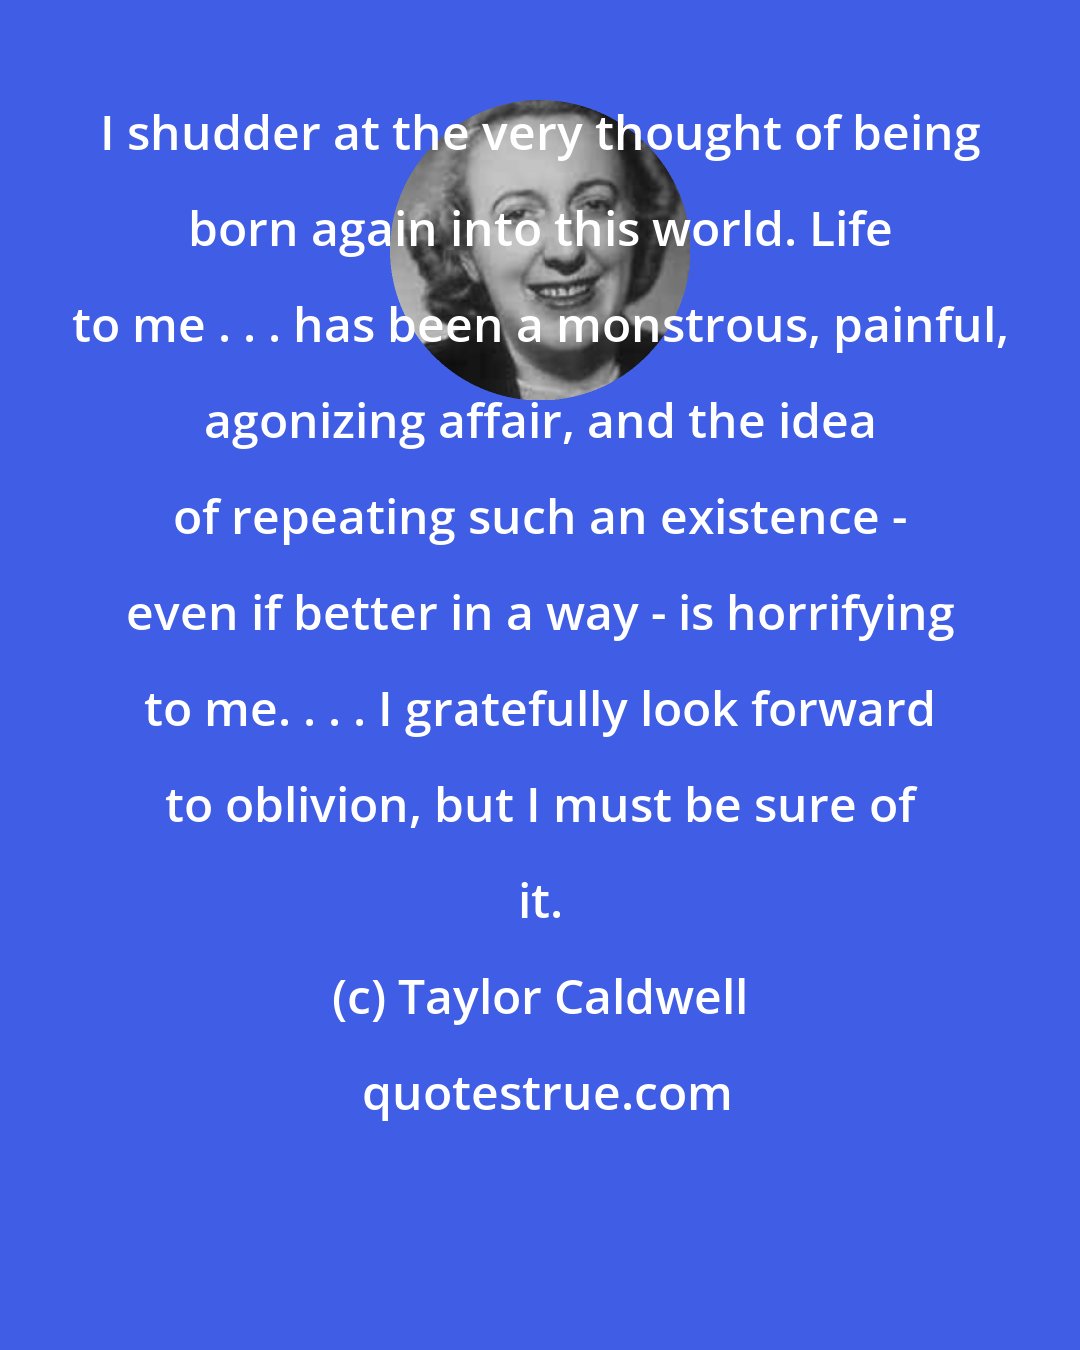 Taylor Caldwell: I shudder at the very thought of being born again into this world. Life to me . . . has been a monstrous, painful, agonizing affair, and the idea of repeating such an existence - even if better in a way - is horrifying to me. . . . I gratefully look forward to oblivion, but I must be sure of it.